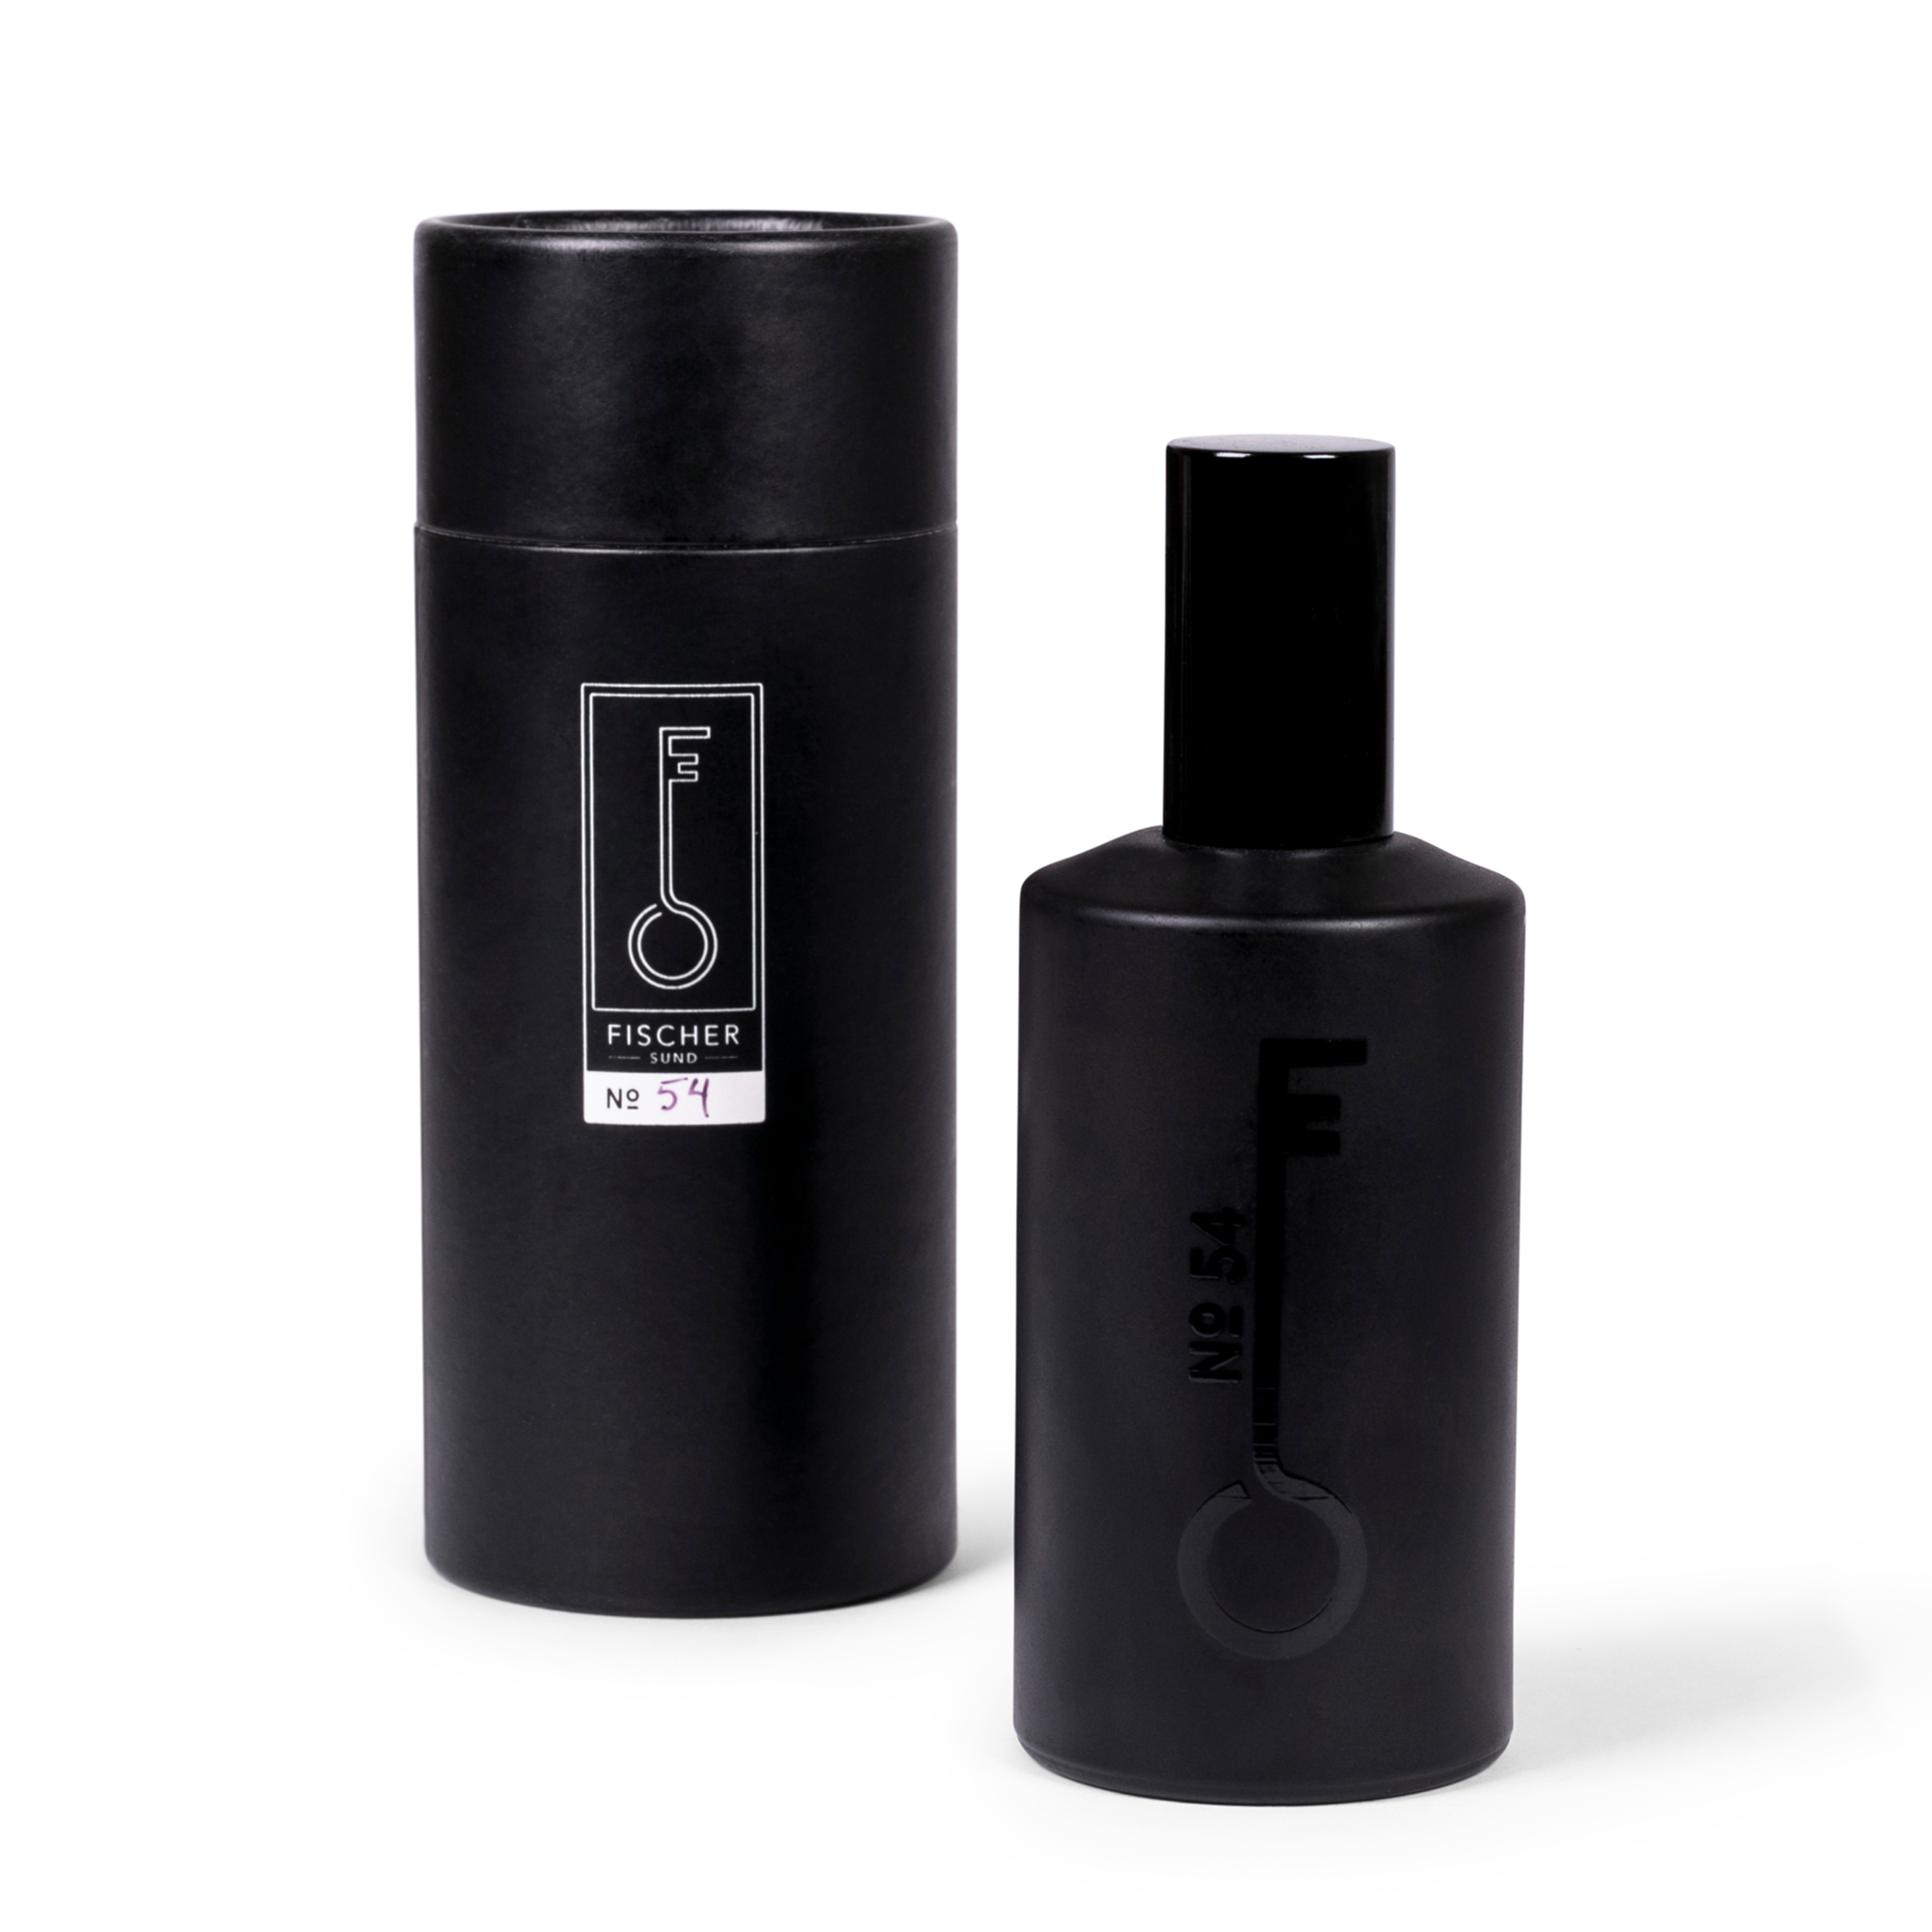 **Fragrance No. 54:** Woody and warm, this fragrance features comforting notes of vetiver, patchouli, and musk. Packed in a sleek black bottle and box, it offers a timeless and inviting scent.